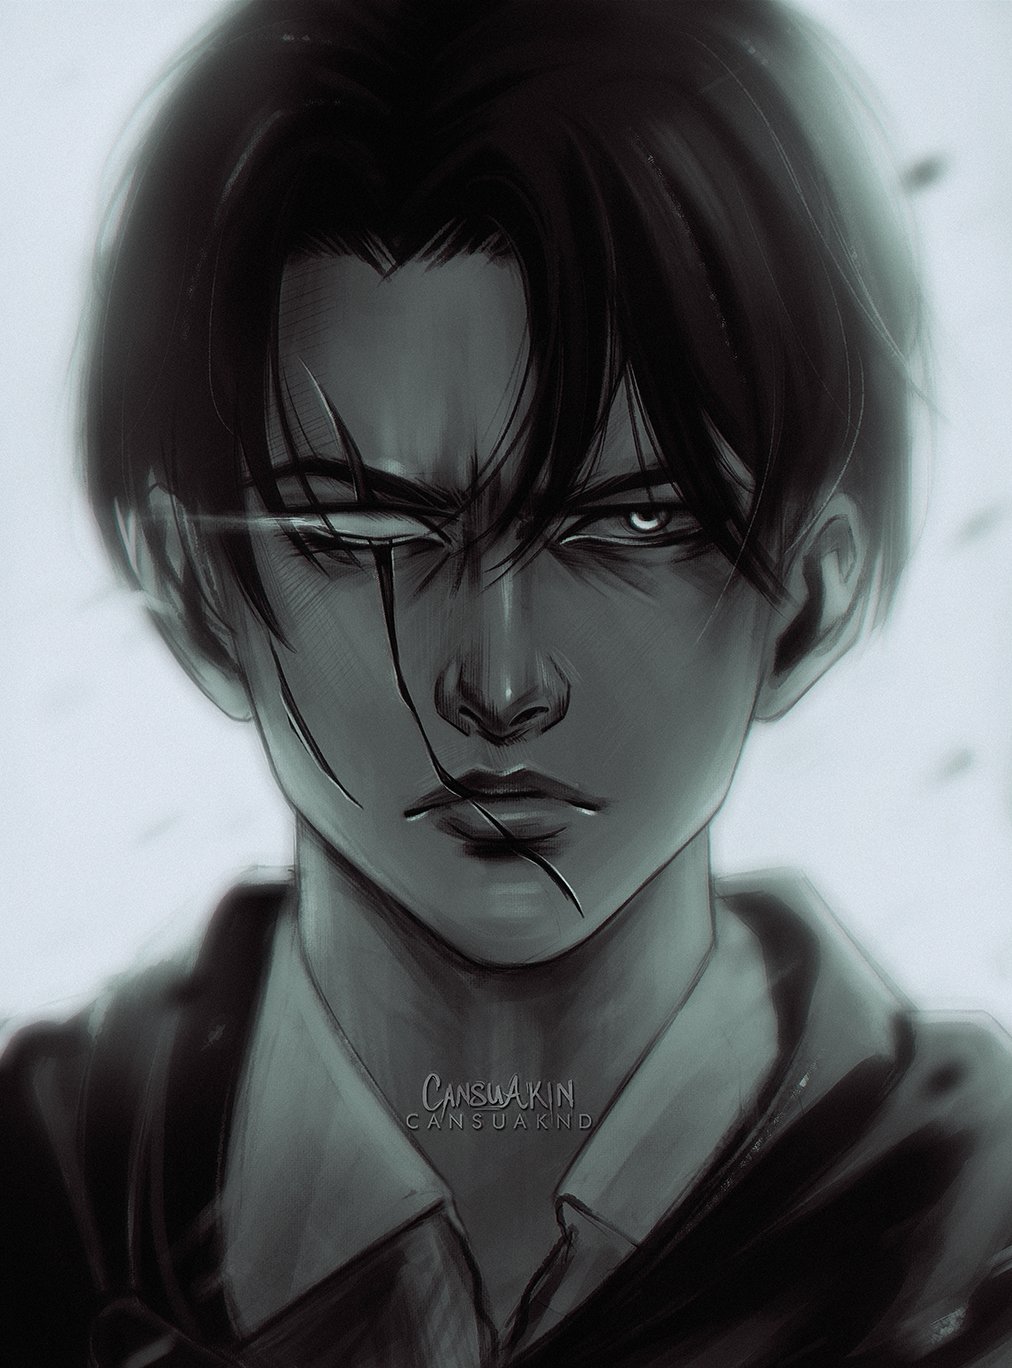 cansuaknd on Twitter: ackerman I tried to draw him in a different style :') #ShingekiNoKyojinTheFinalSeason https://t.co/UqBChQe4bM" / Twitter